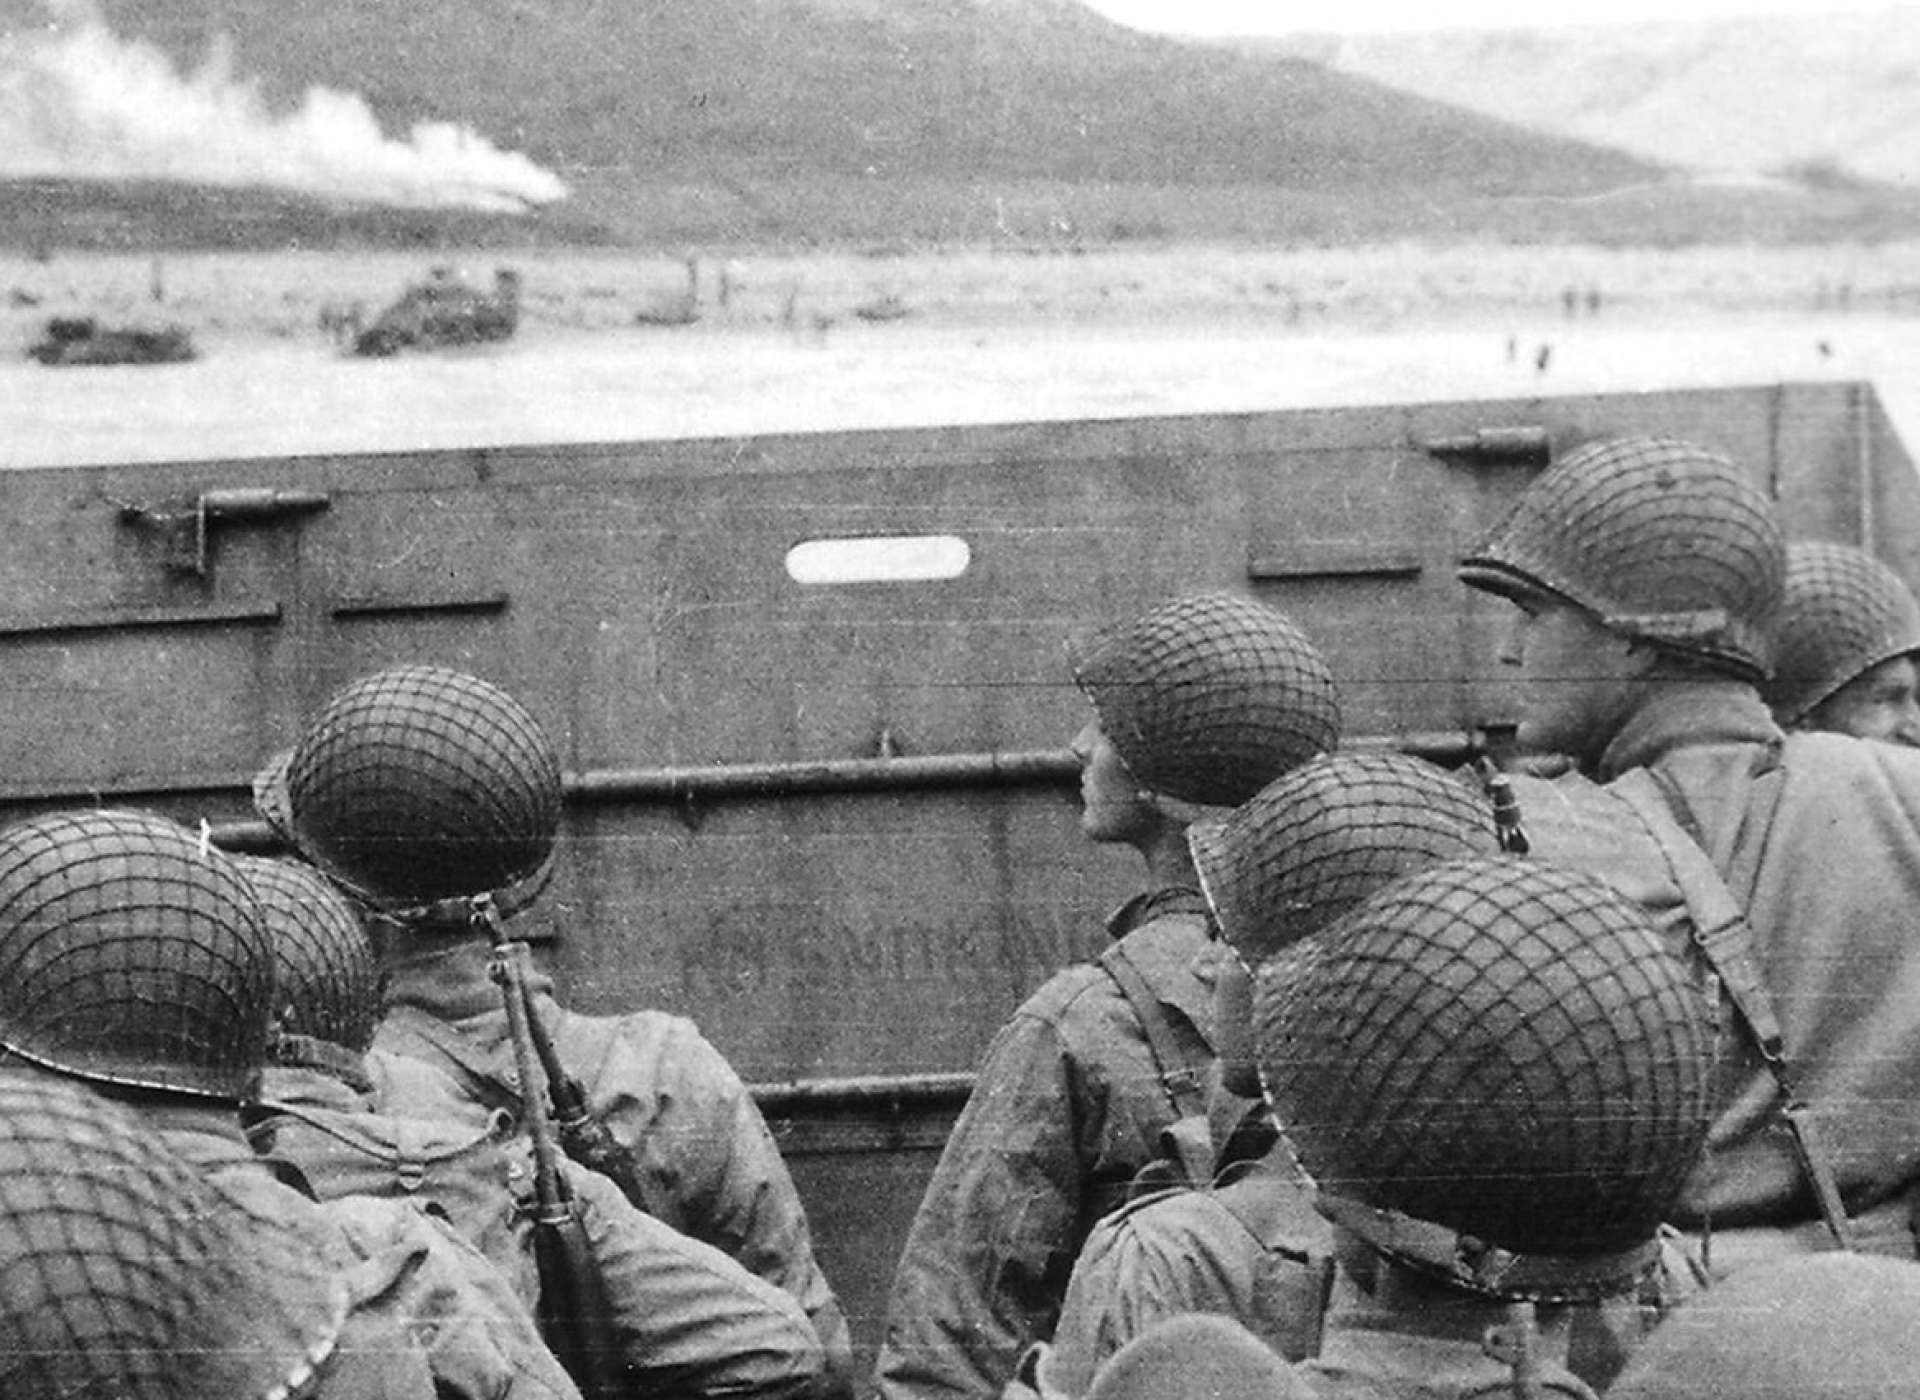 D-Day Invasion of Normandy gallery, photo of soldiers storming the beaches of Normandy